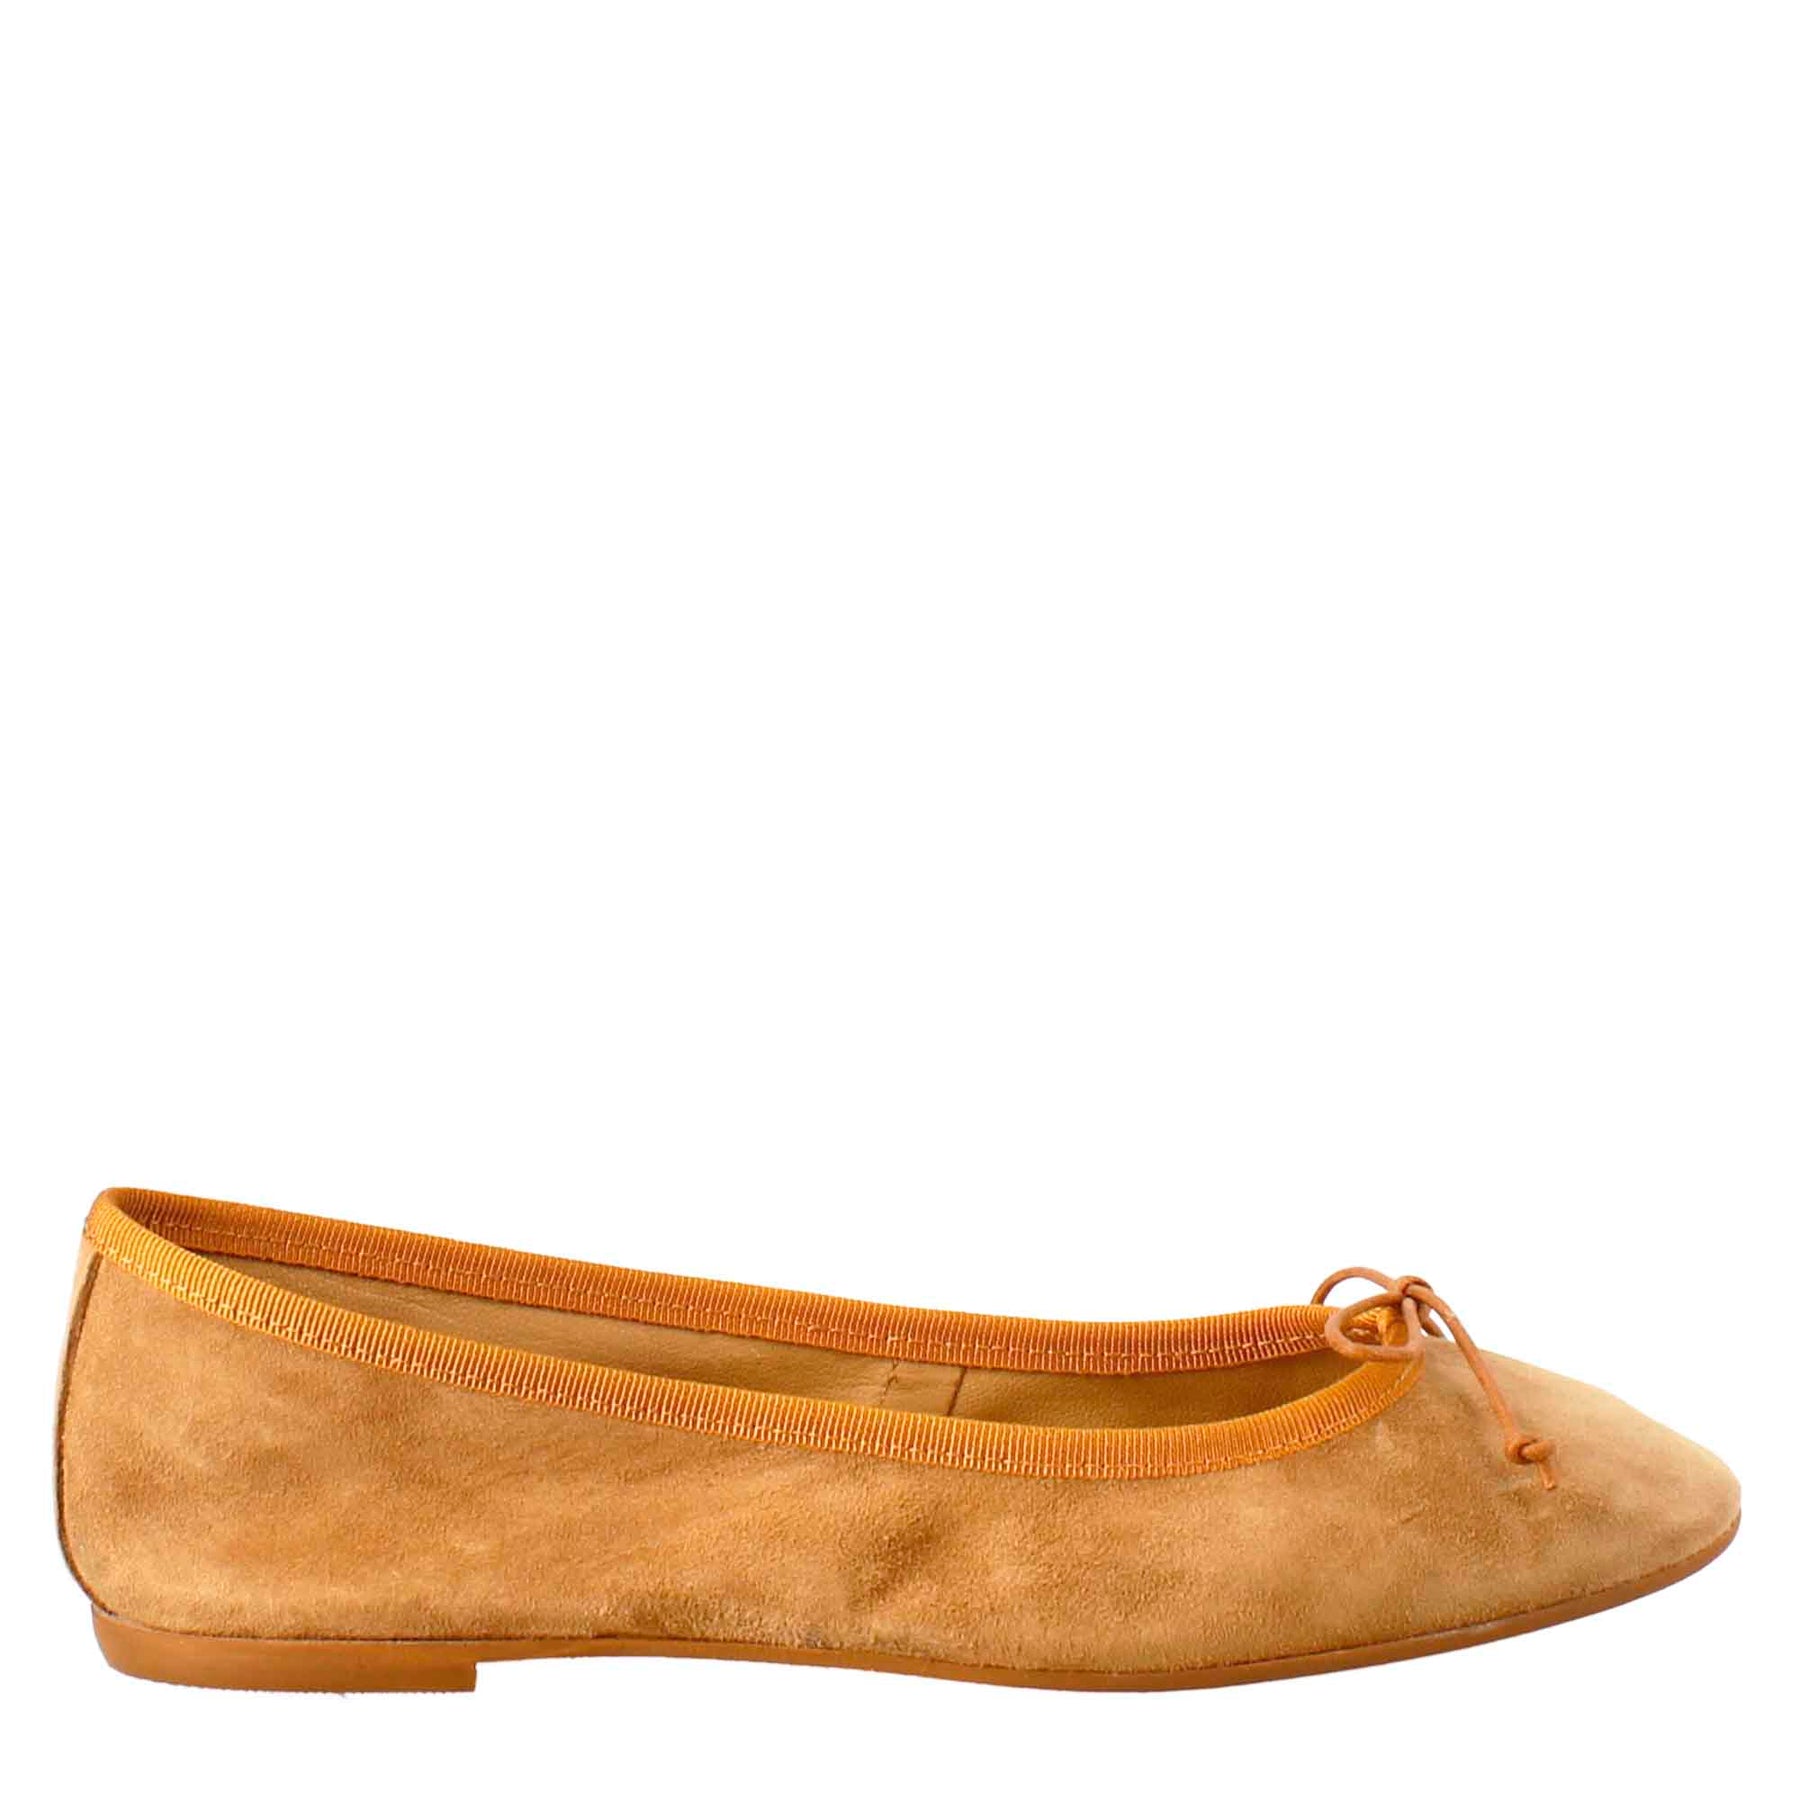 Light brown suede women's ballet flats without lining